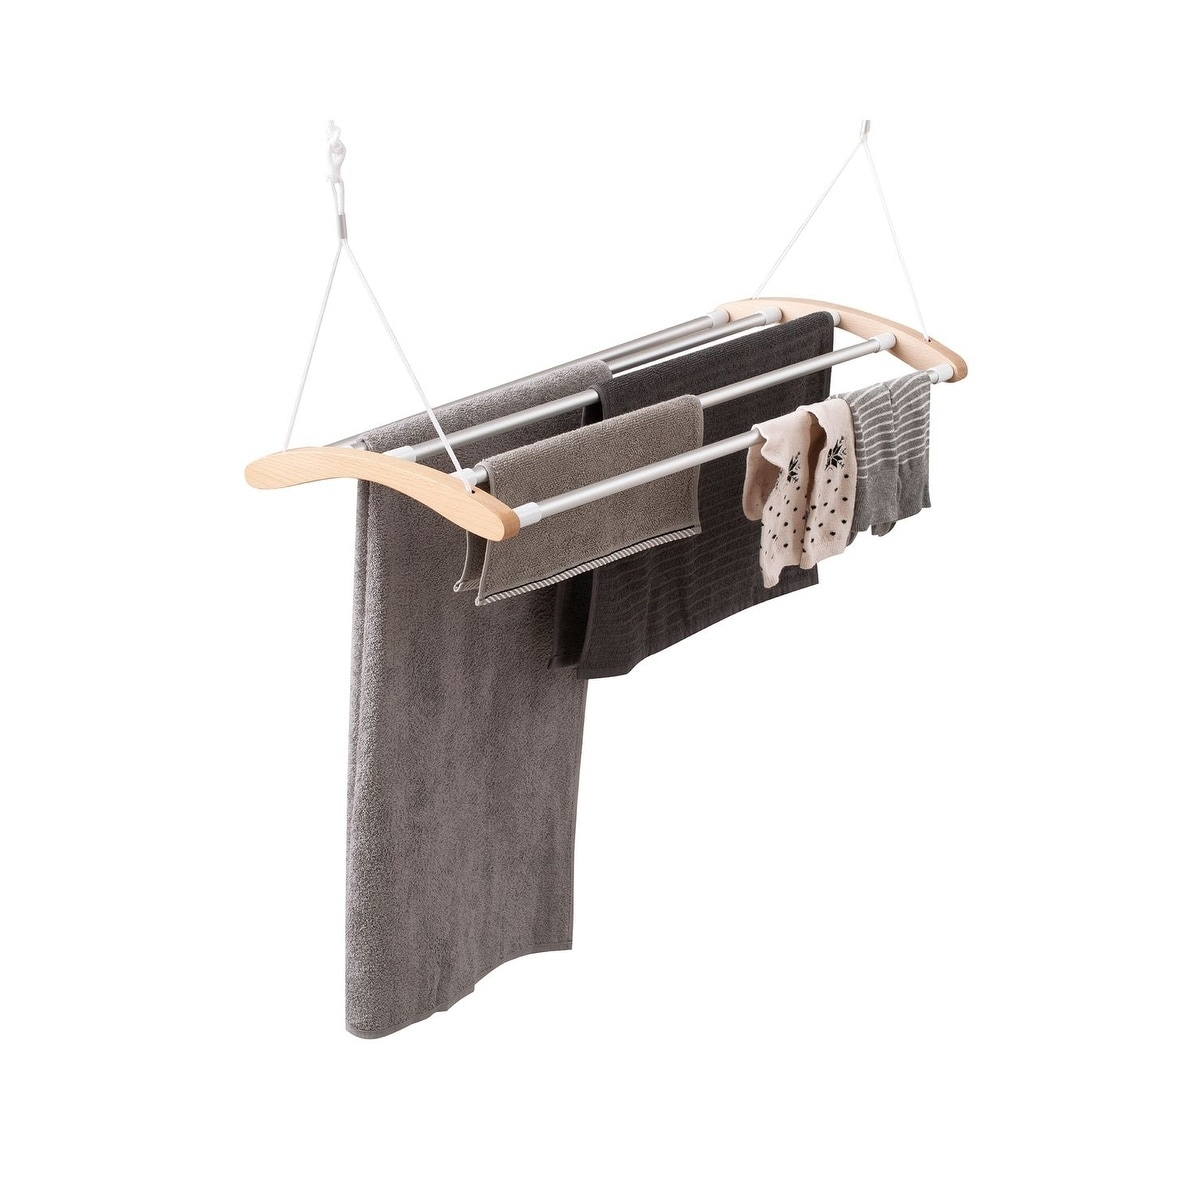 Innoka Birch Wood Extendable Ceiling Clothes Drying Rack Garment Dryer With 5 Aluminum Bars Space Saving Maximum Load 9kg